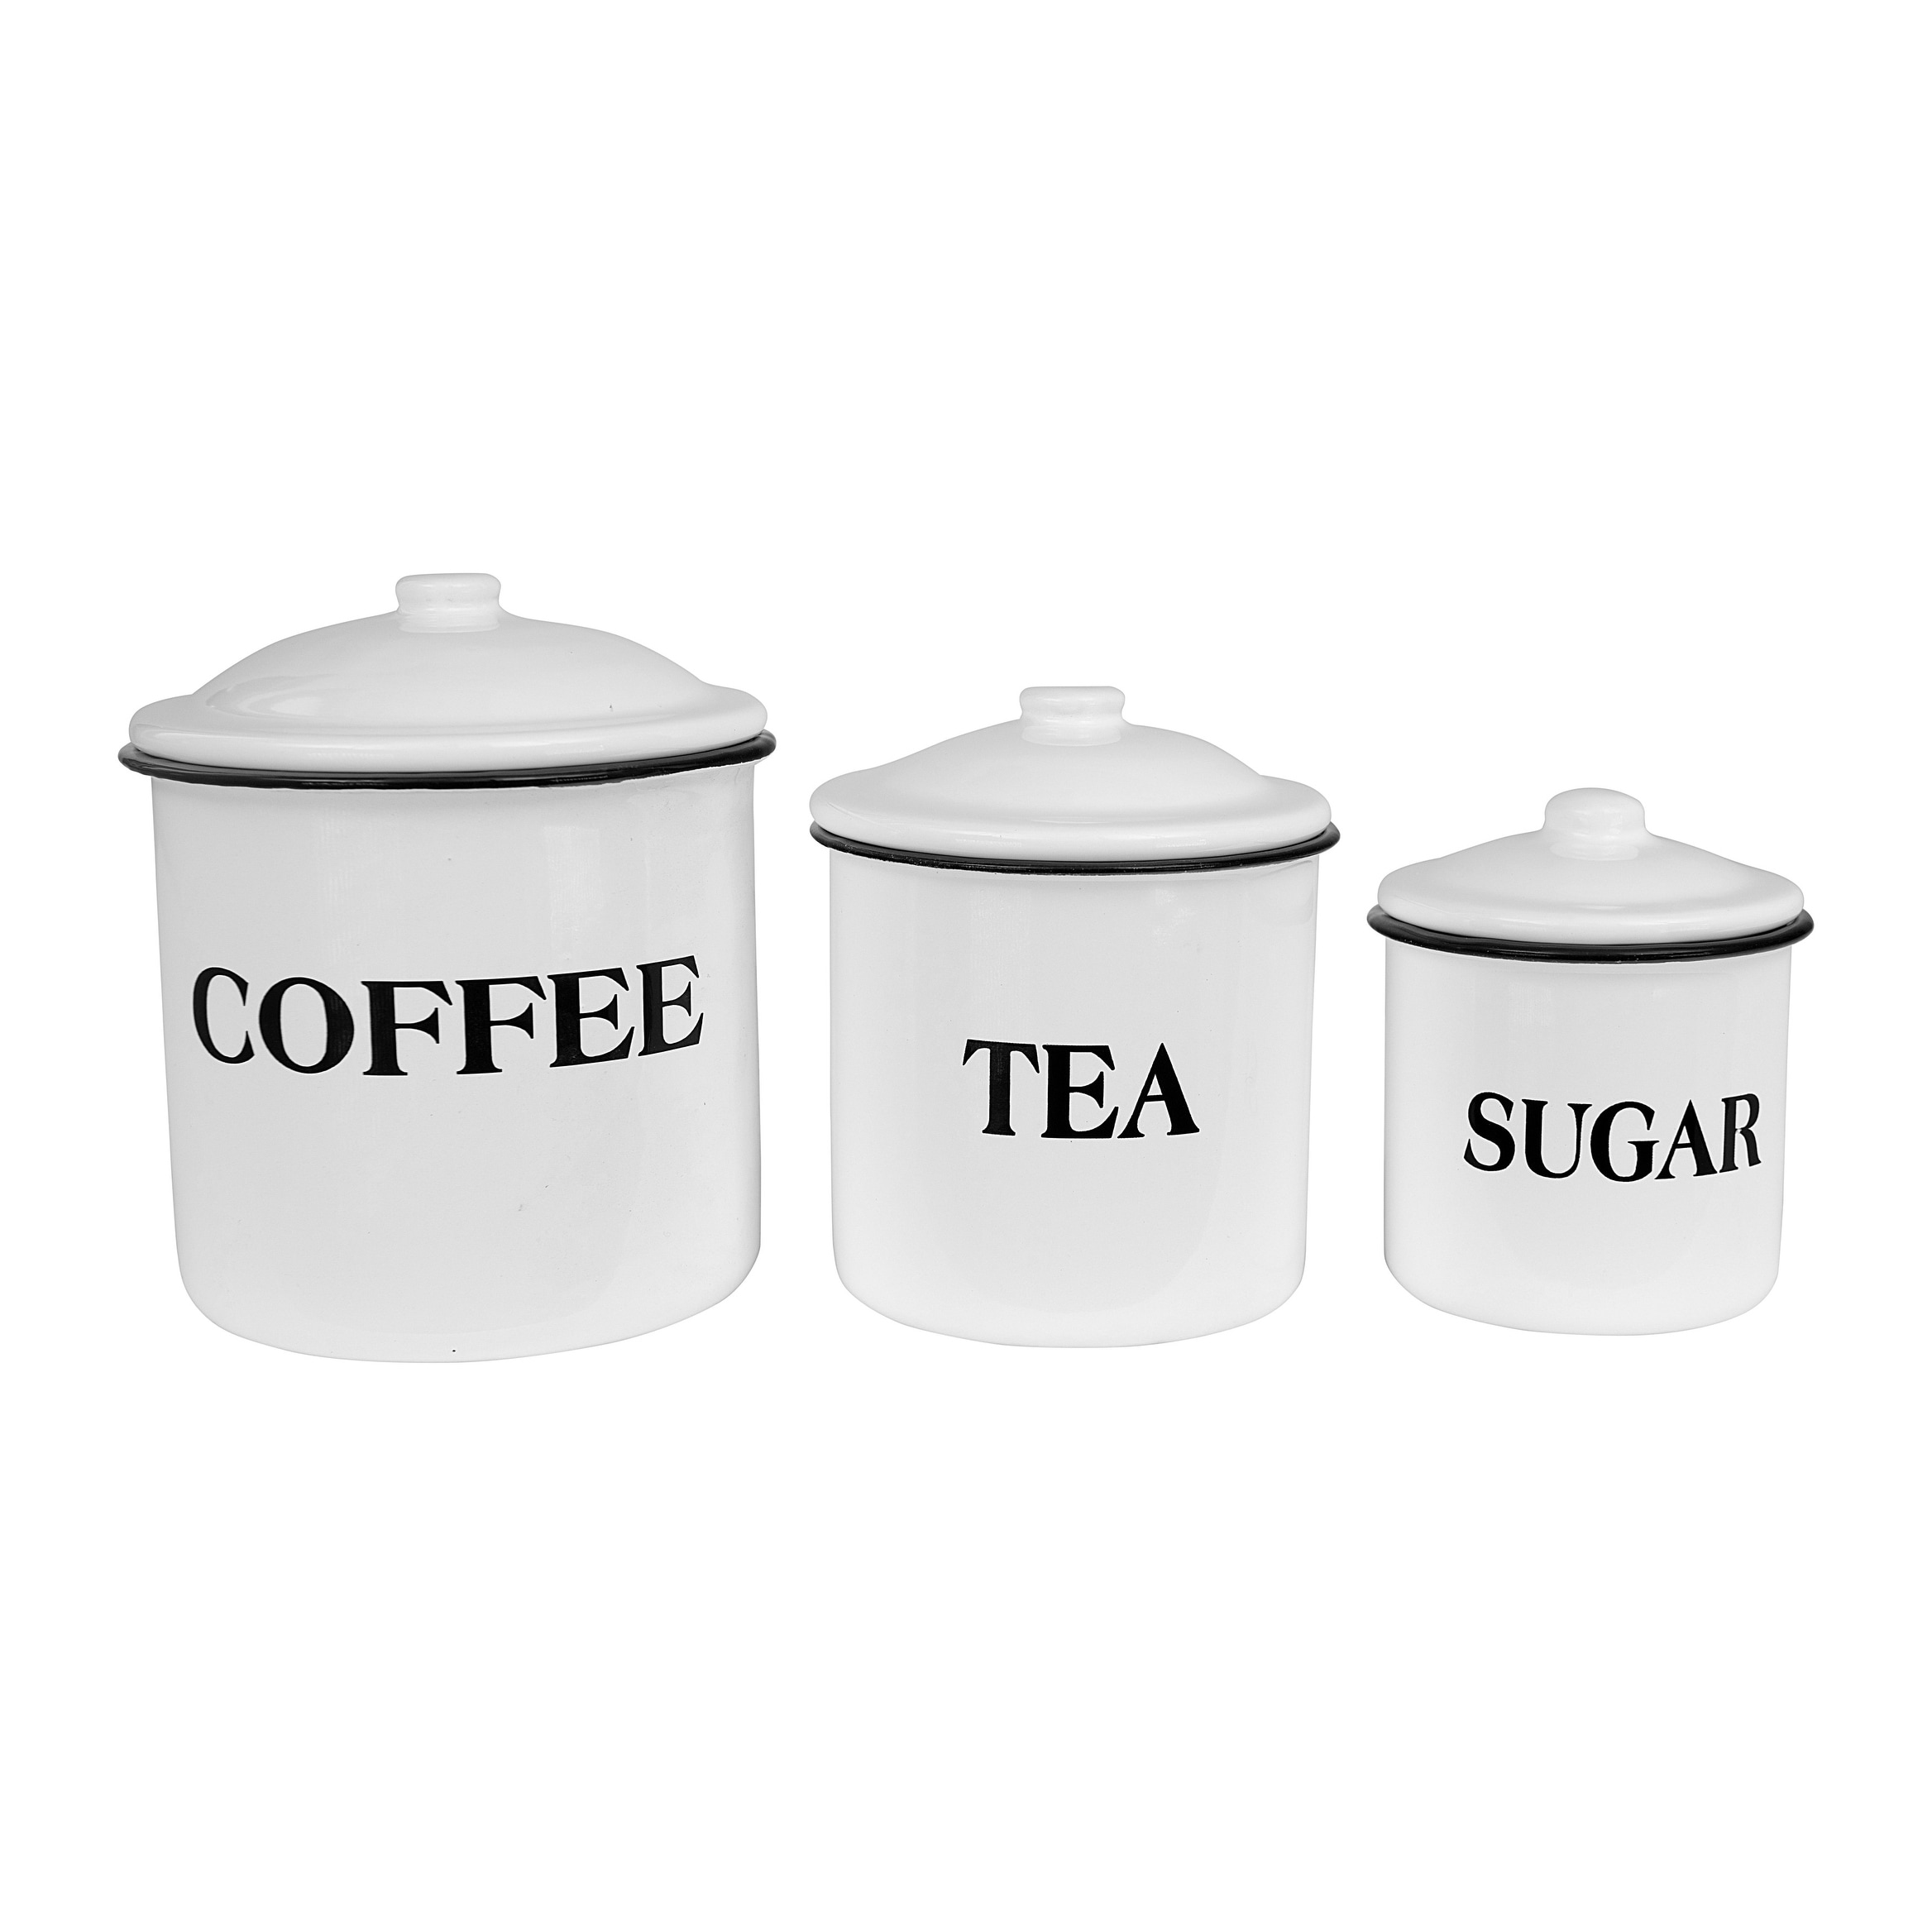 https://ak1.ostkcdn.com/images/products/is/images/direct/9ee75ca9b777f07c25c6e435cf30e69132ff5538/Metal-Containers-with-Lids%2C-Coffee%2C-Tea%2C-Sugar.jpg